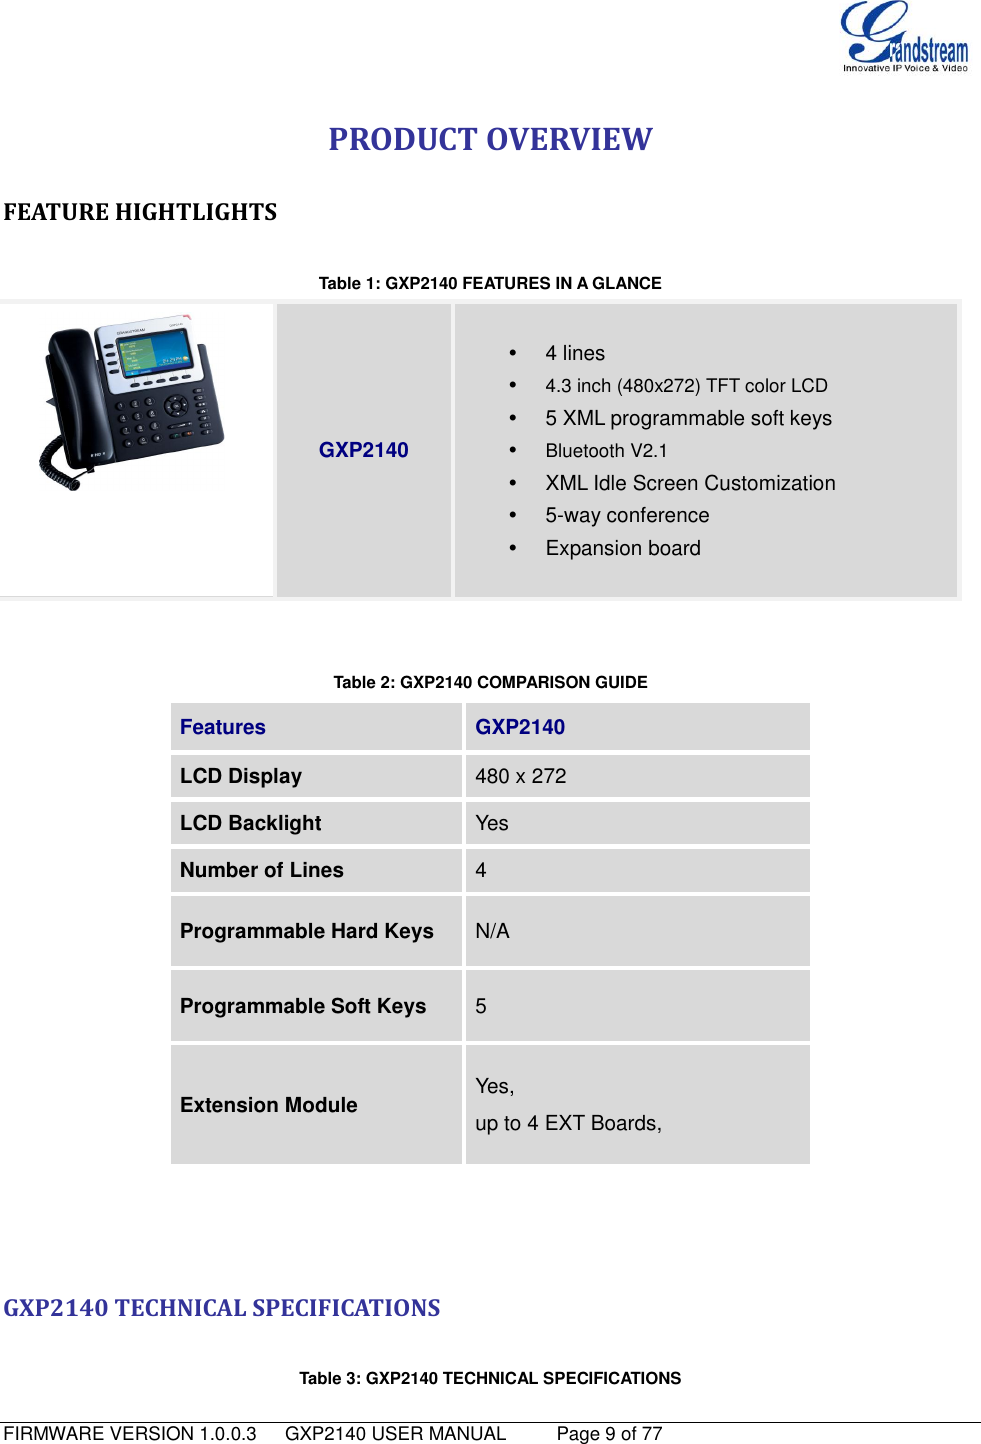   FIRMWARE VERSION 1.0.0.3   GXP2140 USER MANUAL     Page 9 of 77                                   PRODUCT OVERVIEW                               FEATURE HIGHTLIGHTS  Table 1: GXP2140 FEATURES IN A GLANCE  GXP2140    4 lines  4.3 inch (480x272) TFT color LCD   5 XML programmable soft keys  Bluetooth V2.1   XML Idle Screen Customization   5-way conference   Expansion board    Table 2: GXP2140 COMPARISON GUIDE Features GXP2140            LCD Display 480 x 272 LCD Backlight Yes Number of Lines 4 Programmable Hard Keys N/A Programmable Soft Keys 5 Extension Module Yes, up to 4 EXT Boards,    GXP2140 TECHNICAL SPECIFICATIONS  Table 3: GXP2140 TECHNICAL SPECIFICATIONS 